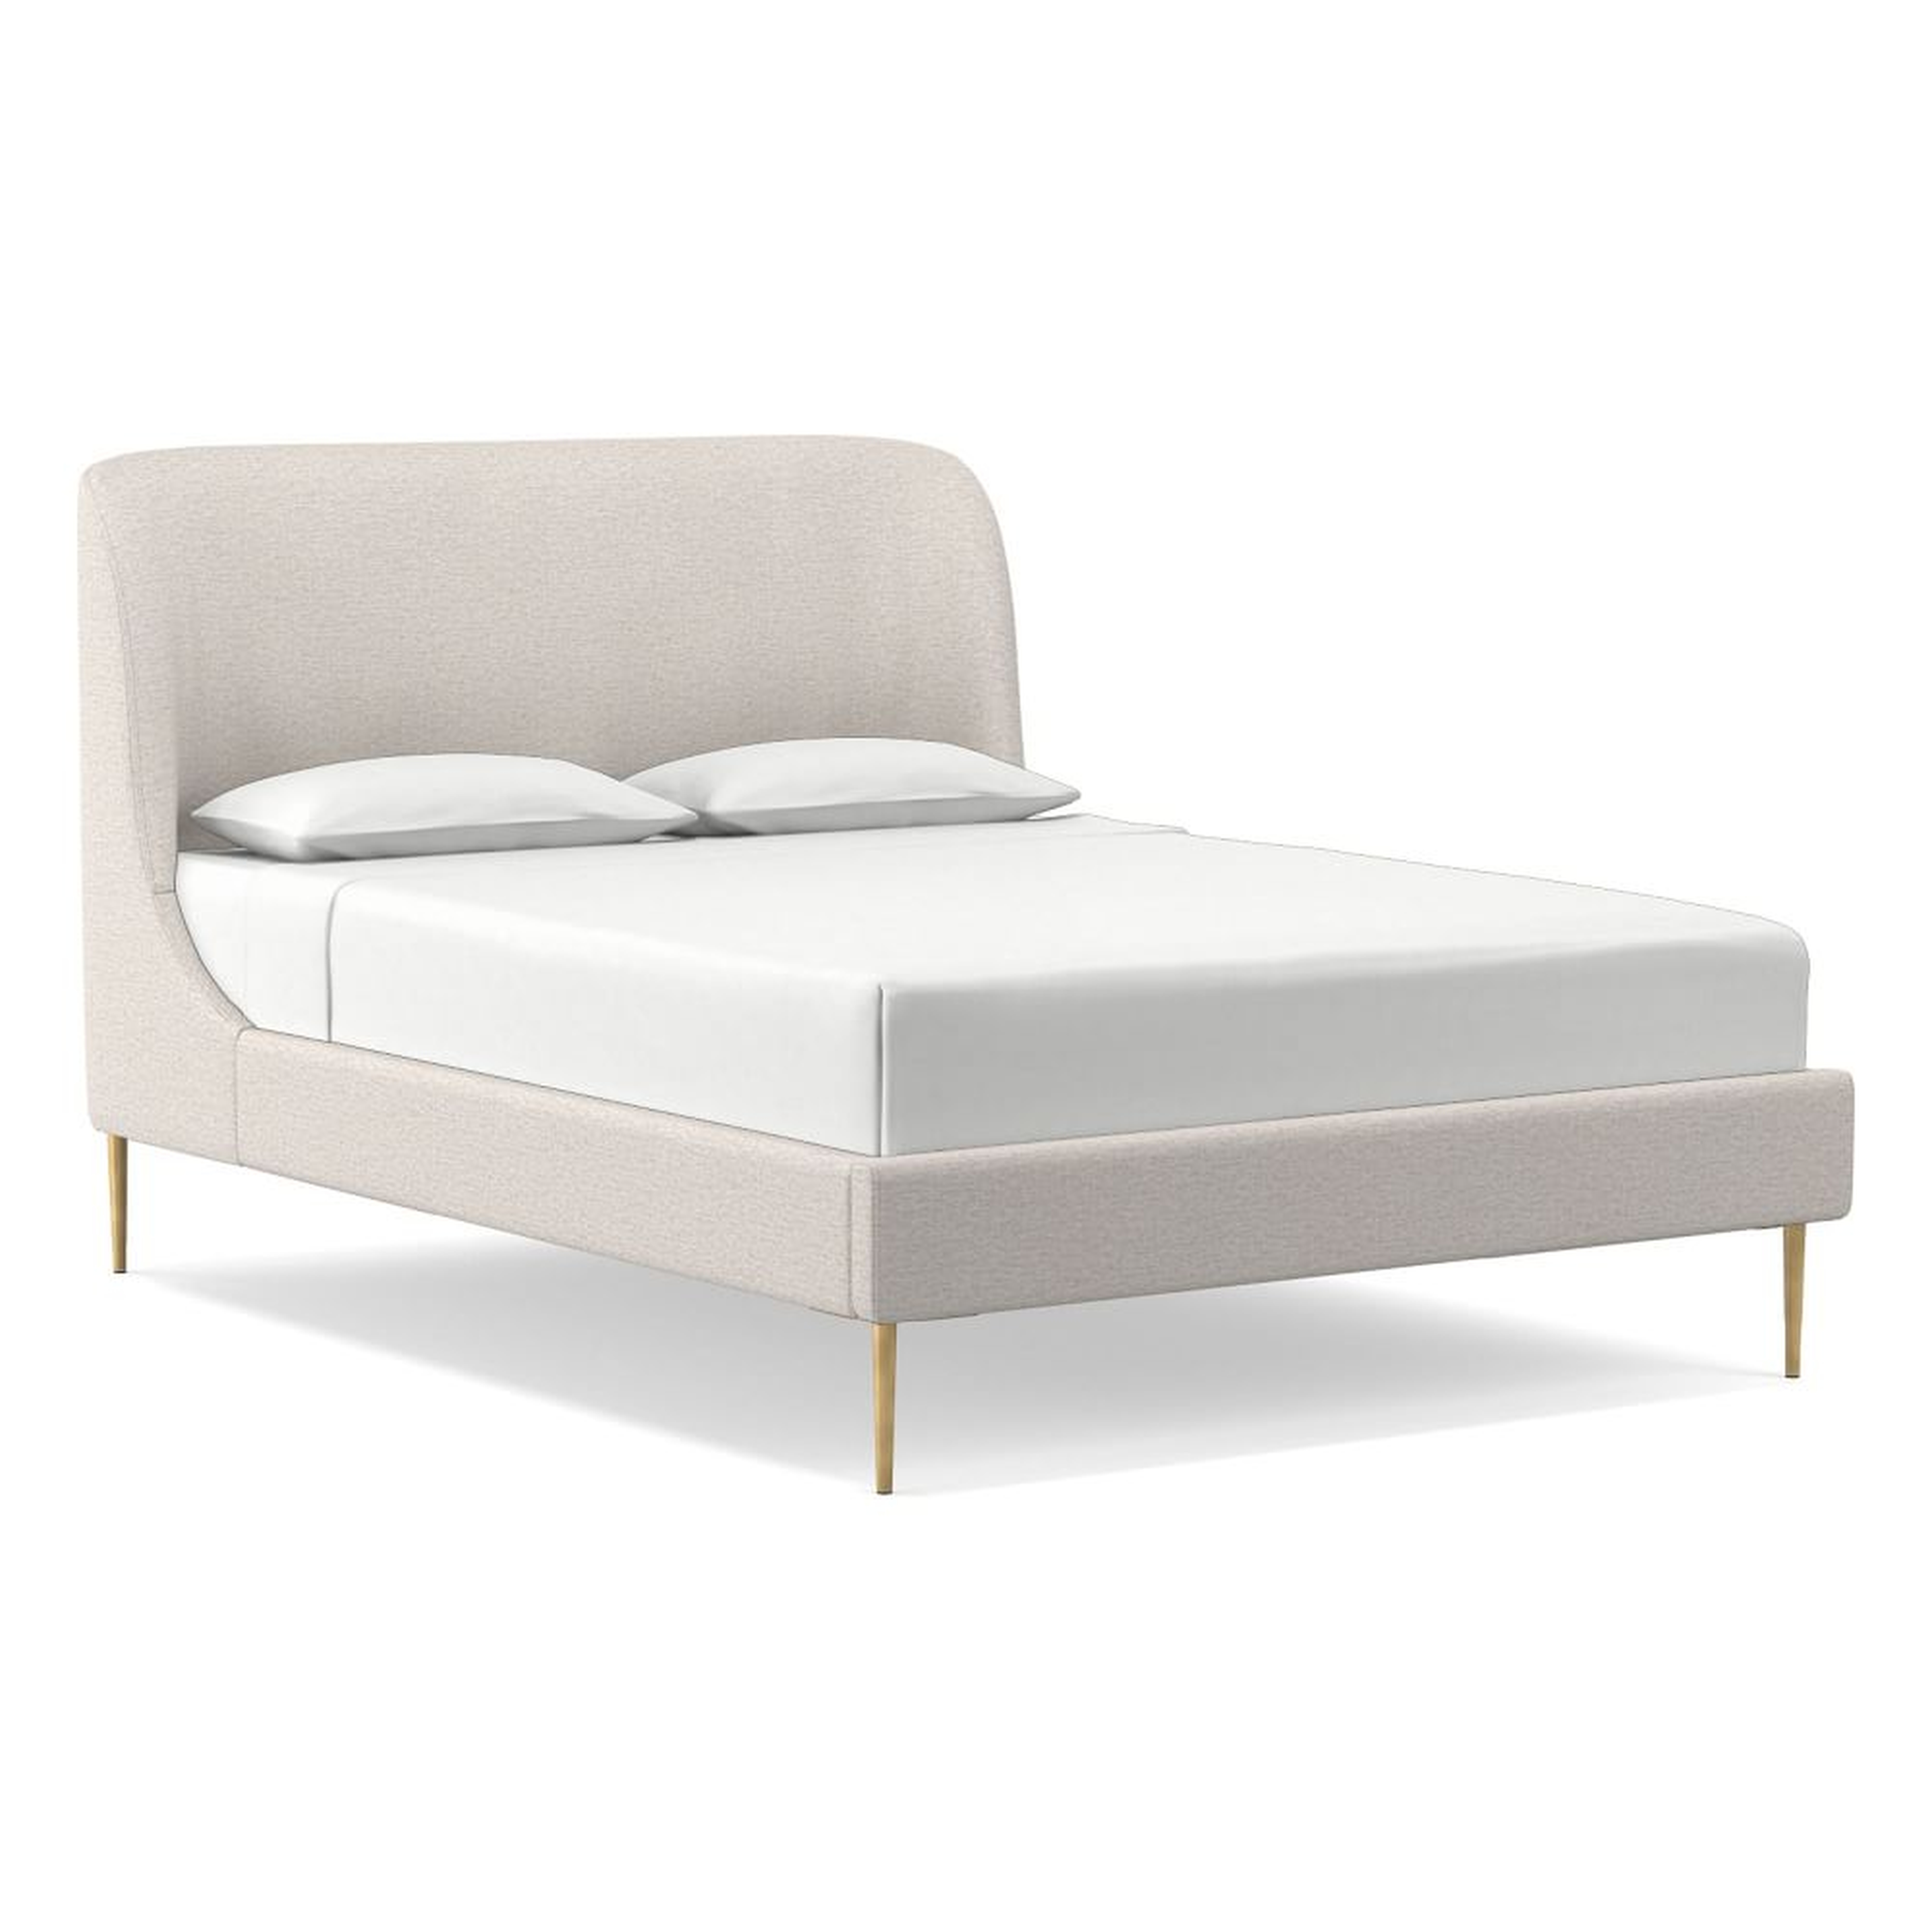 Lana Upholstered Bed, Queen, Twill, Sand - West Elm